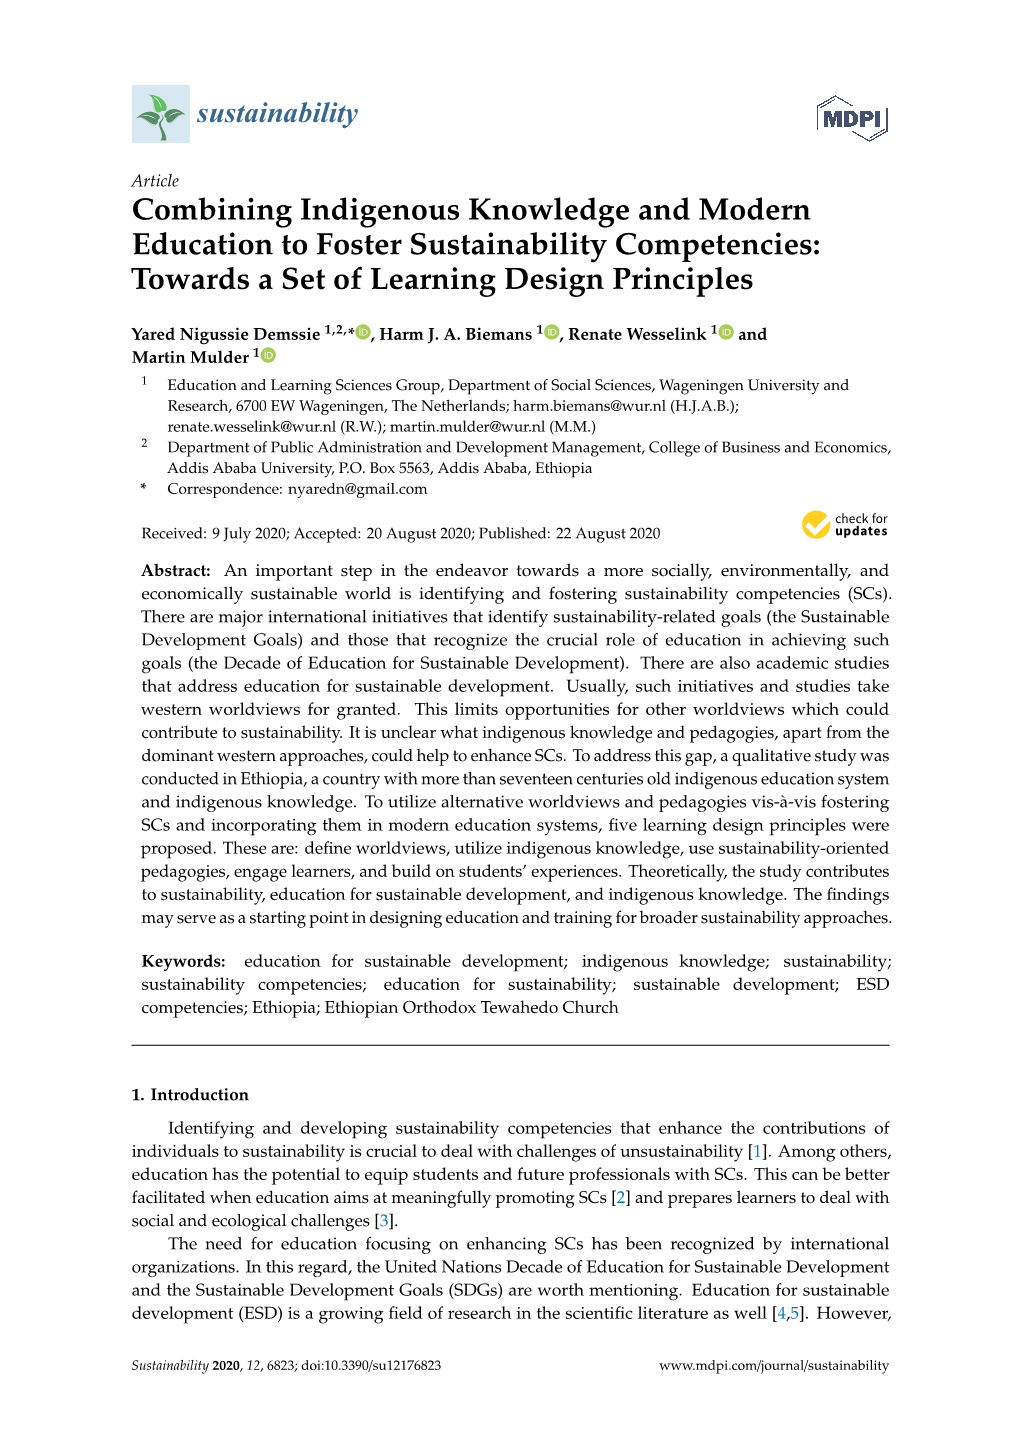 Combining Indigenous Knowledge and Modern Education to Foster Sustainability Competencies: Towards a Set of Learning Design Principles